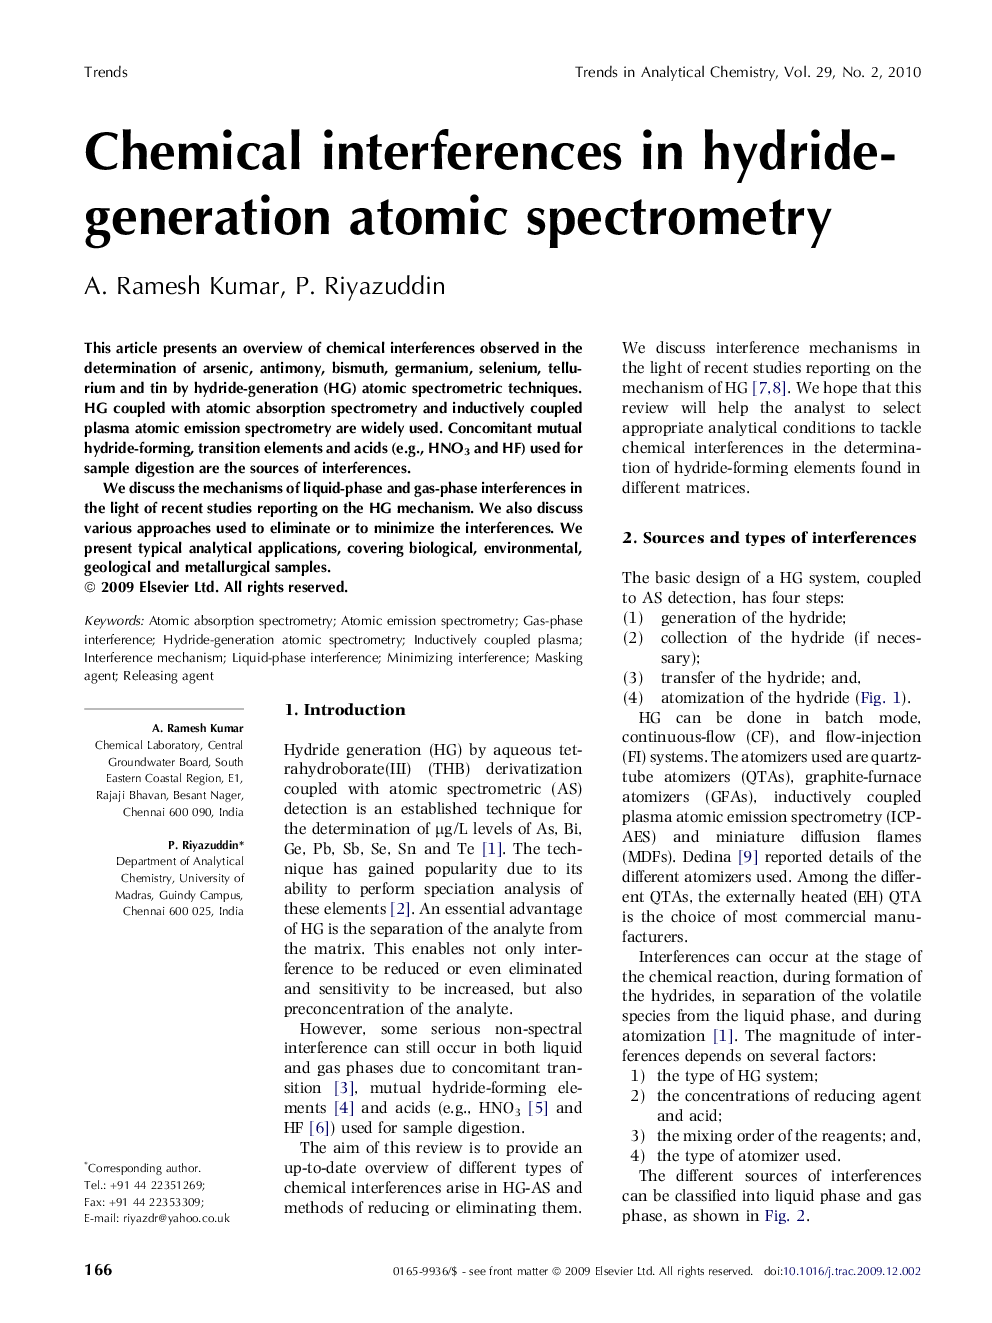 Chemical interferences in hydride-generation atomic spectrometry